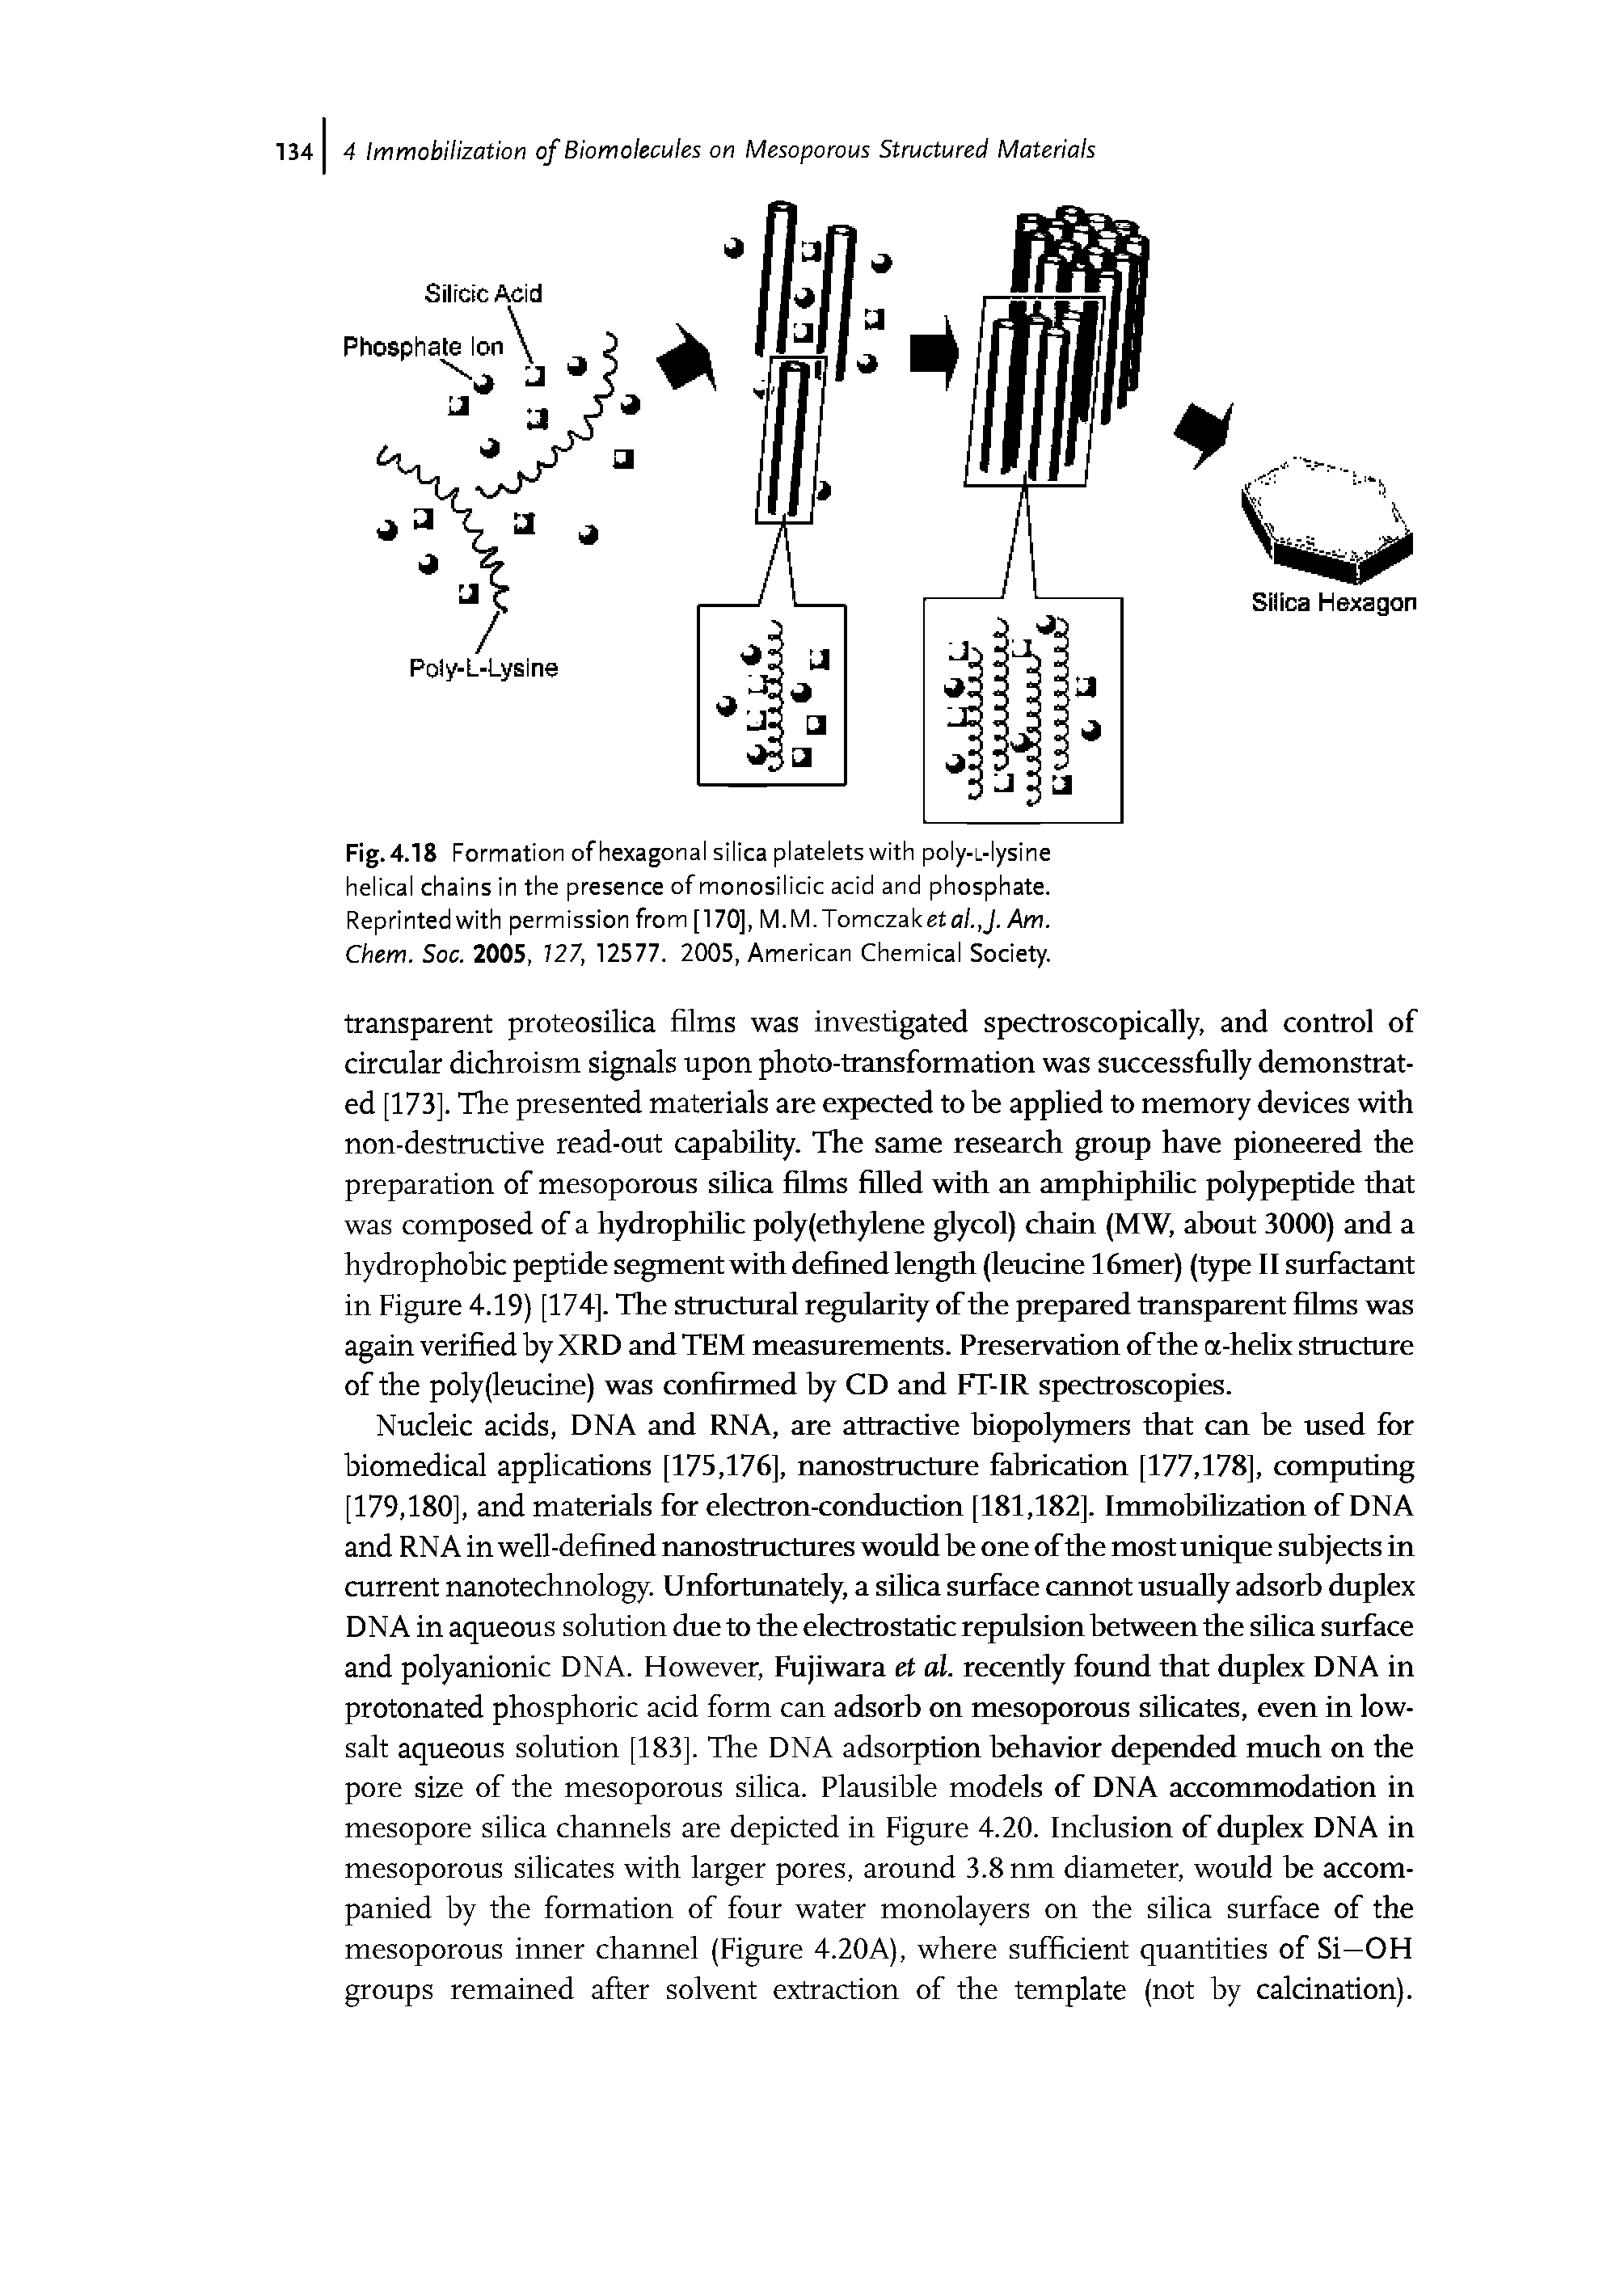 Fig. 4.18 Formation ofhexagonal silica platelets with poly-L-lysine helical chains in the presence of monosilicic acid and phosphate. Reprinted with permission from [170], M.M.Tomczaketa/.J. Am. Chem. Soc. 2005, 727, 12577. 2005, American Chemical Society.